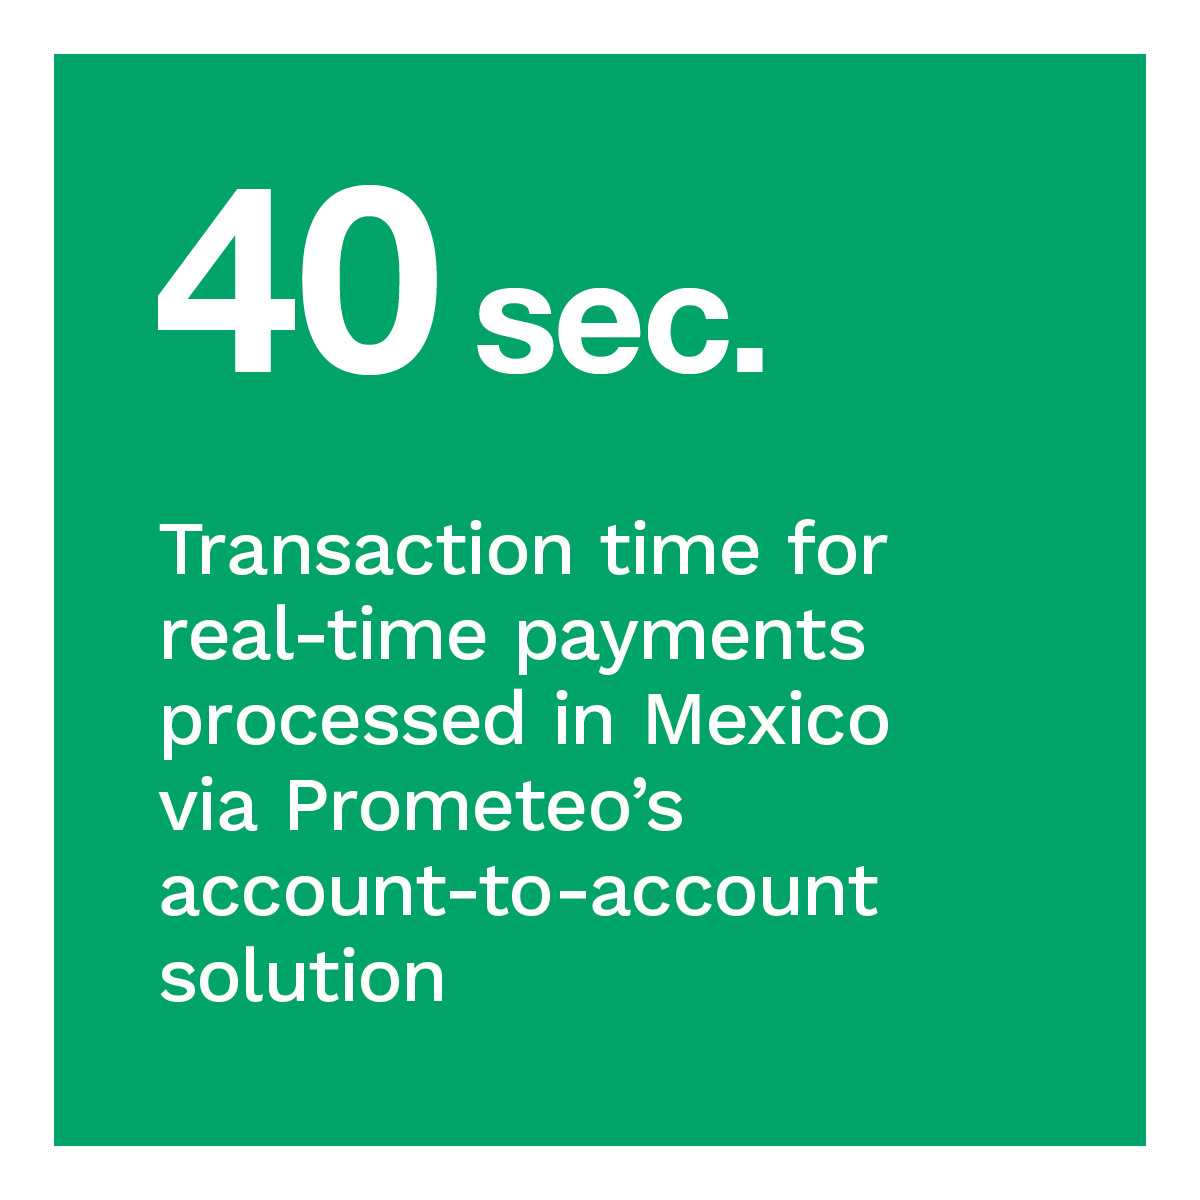  Transaction time for real-time payments processed in Mexico via Prometeo’s account-to-account solution